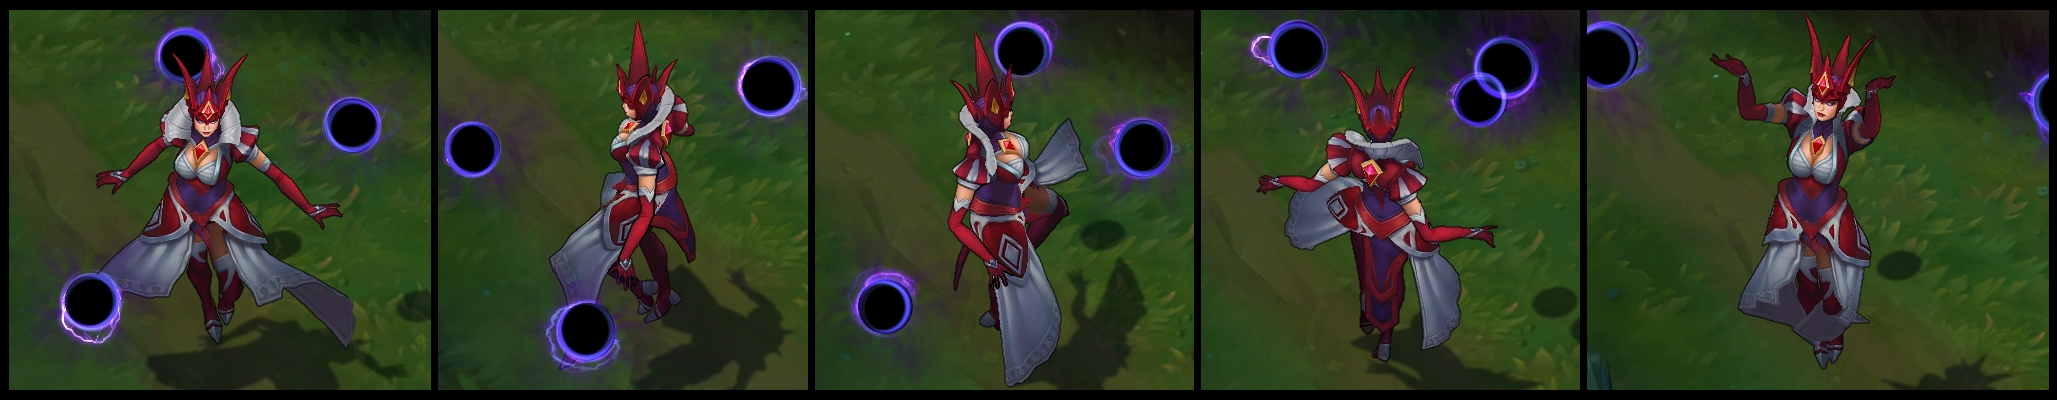 Queen of Diamonds Syndra Poses